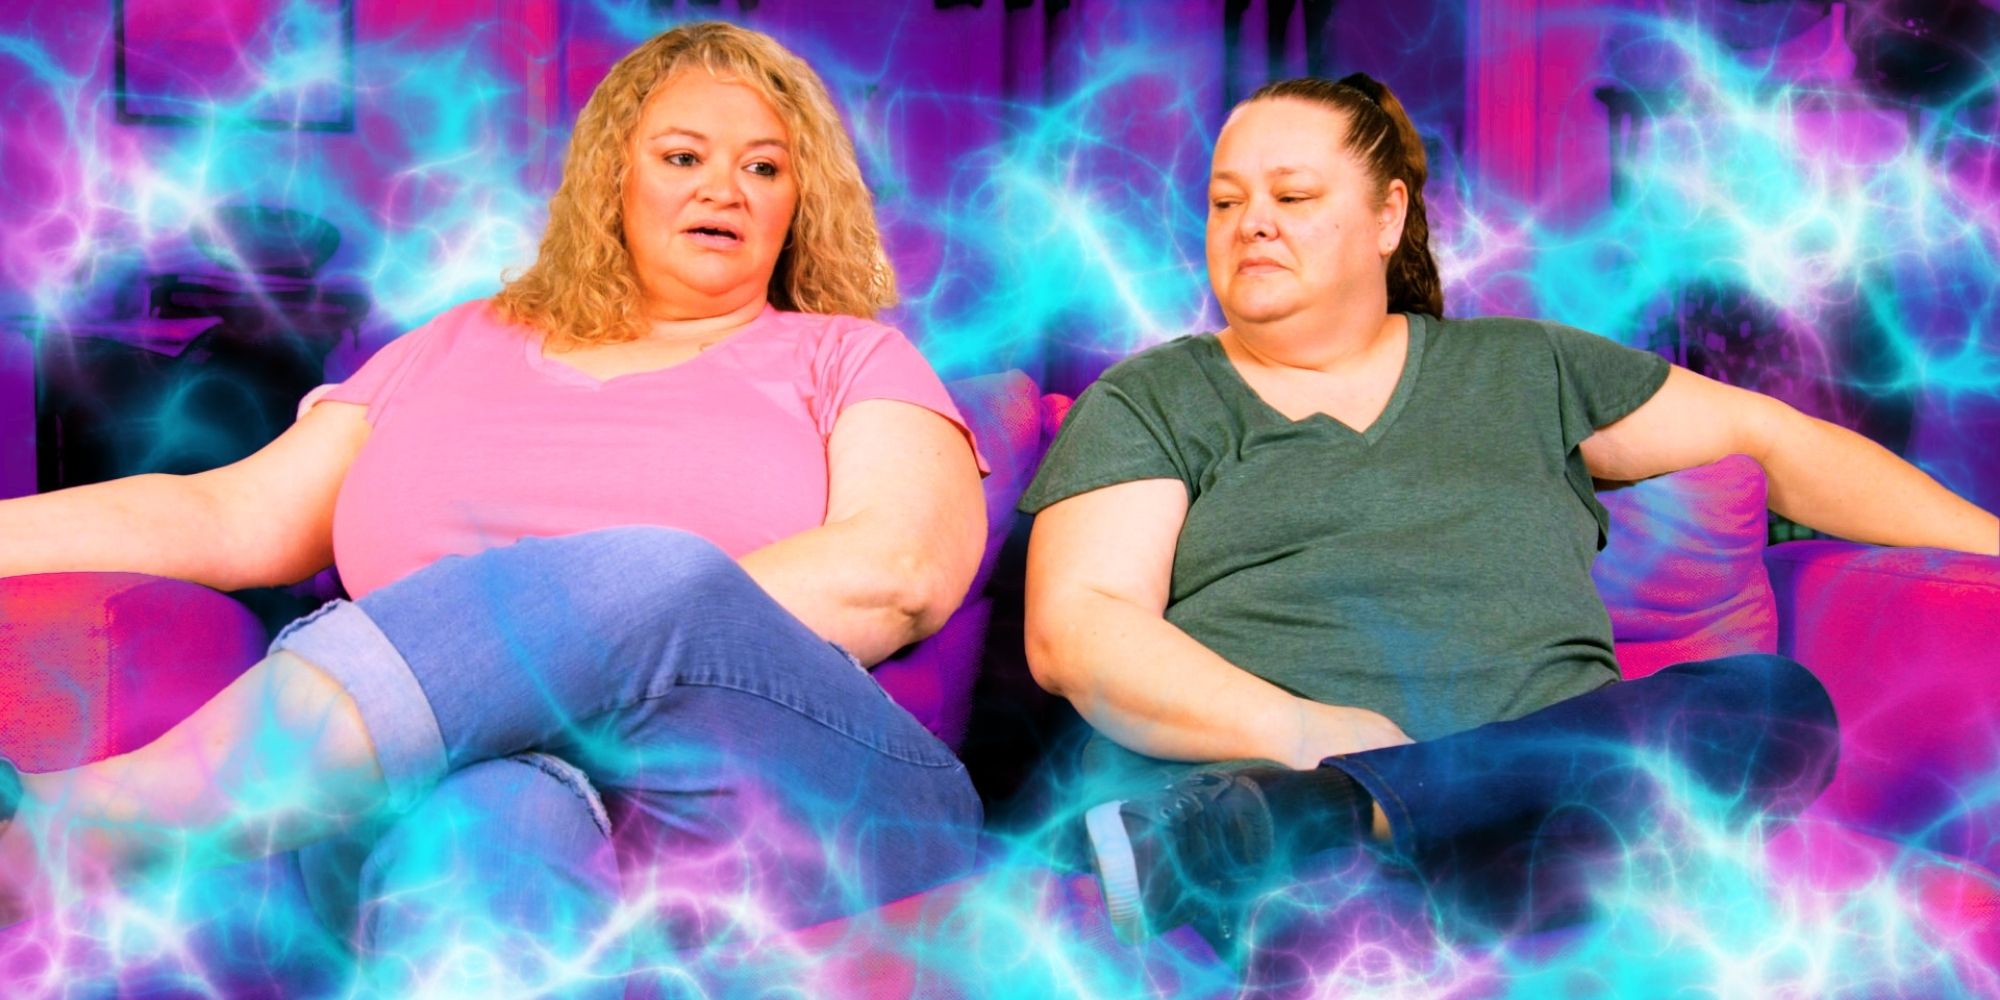 1000-lb Sisters stars Amanda Halterman and Misty Slaton Wentworth seated side by side, looking contemplative, surrounded by lights and smoke